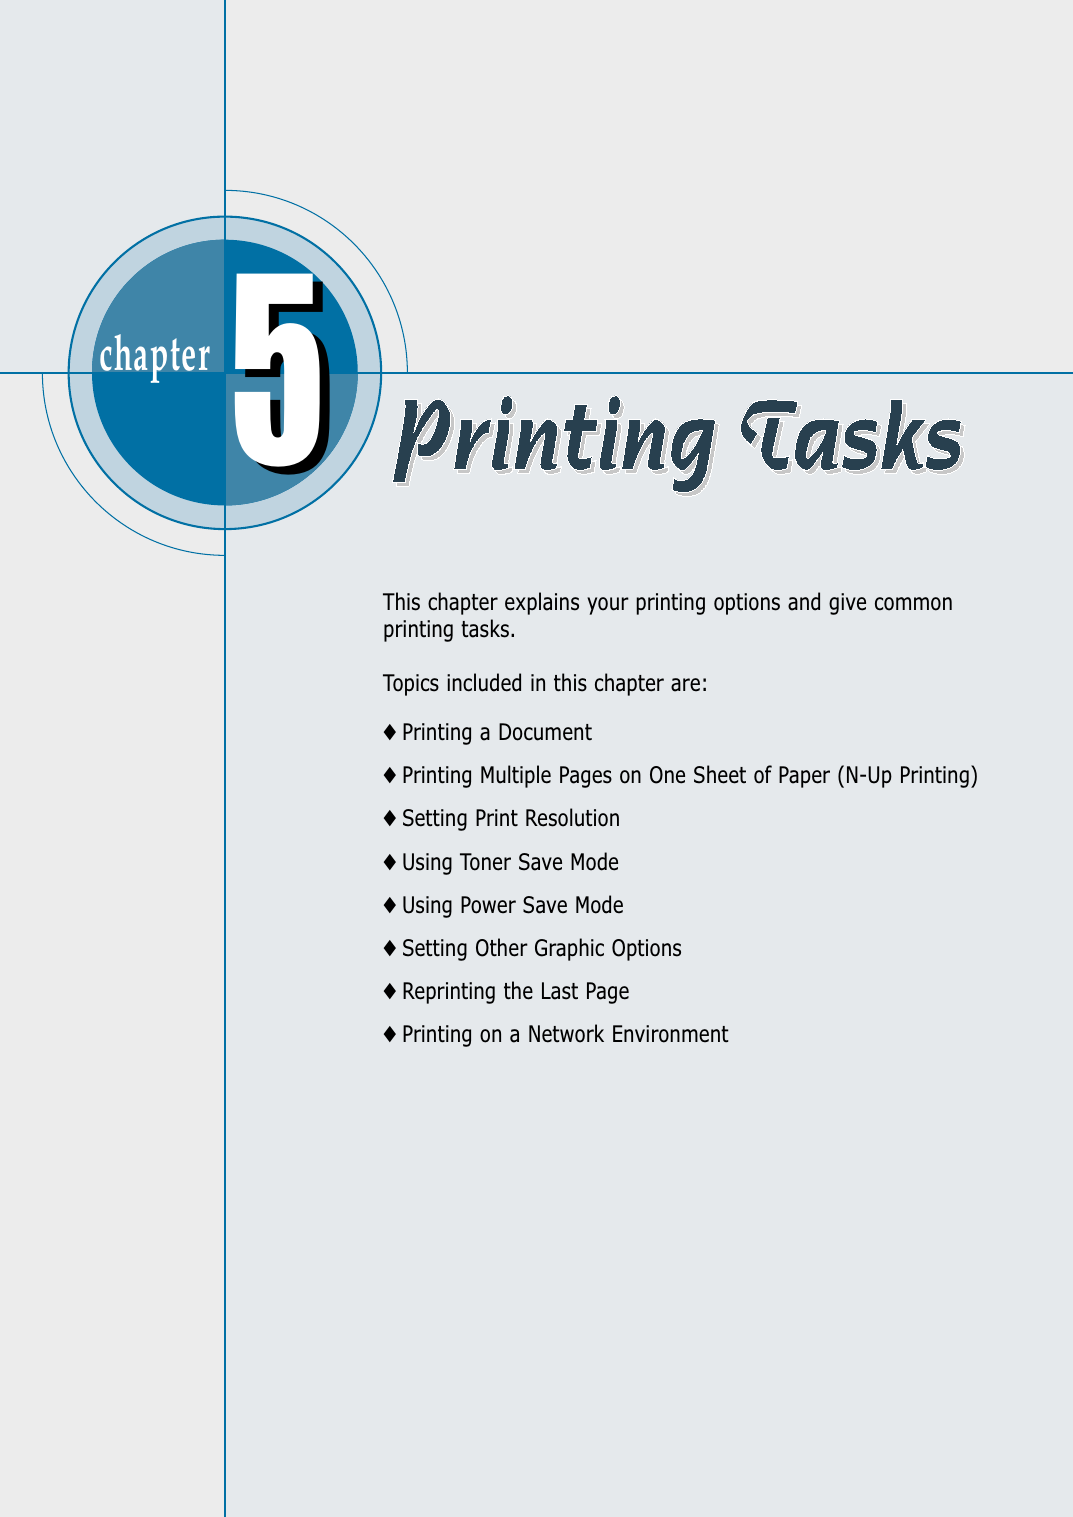 chapter  This chapter explains your printing options and give commonprinting tasks.Topics included in this chapter are:◆ Printing a Document◆ Printing Multiple Pages on One Sheet of Paper (N-Up Printing)◆ Setting Print Resolution◆ Using Toner Save Mode◆ Using Power Save Mode◆ Setting Other Graphic Options◆ Reprinting the Last Page◆ Printing on a Network Environment55